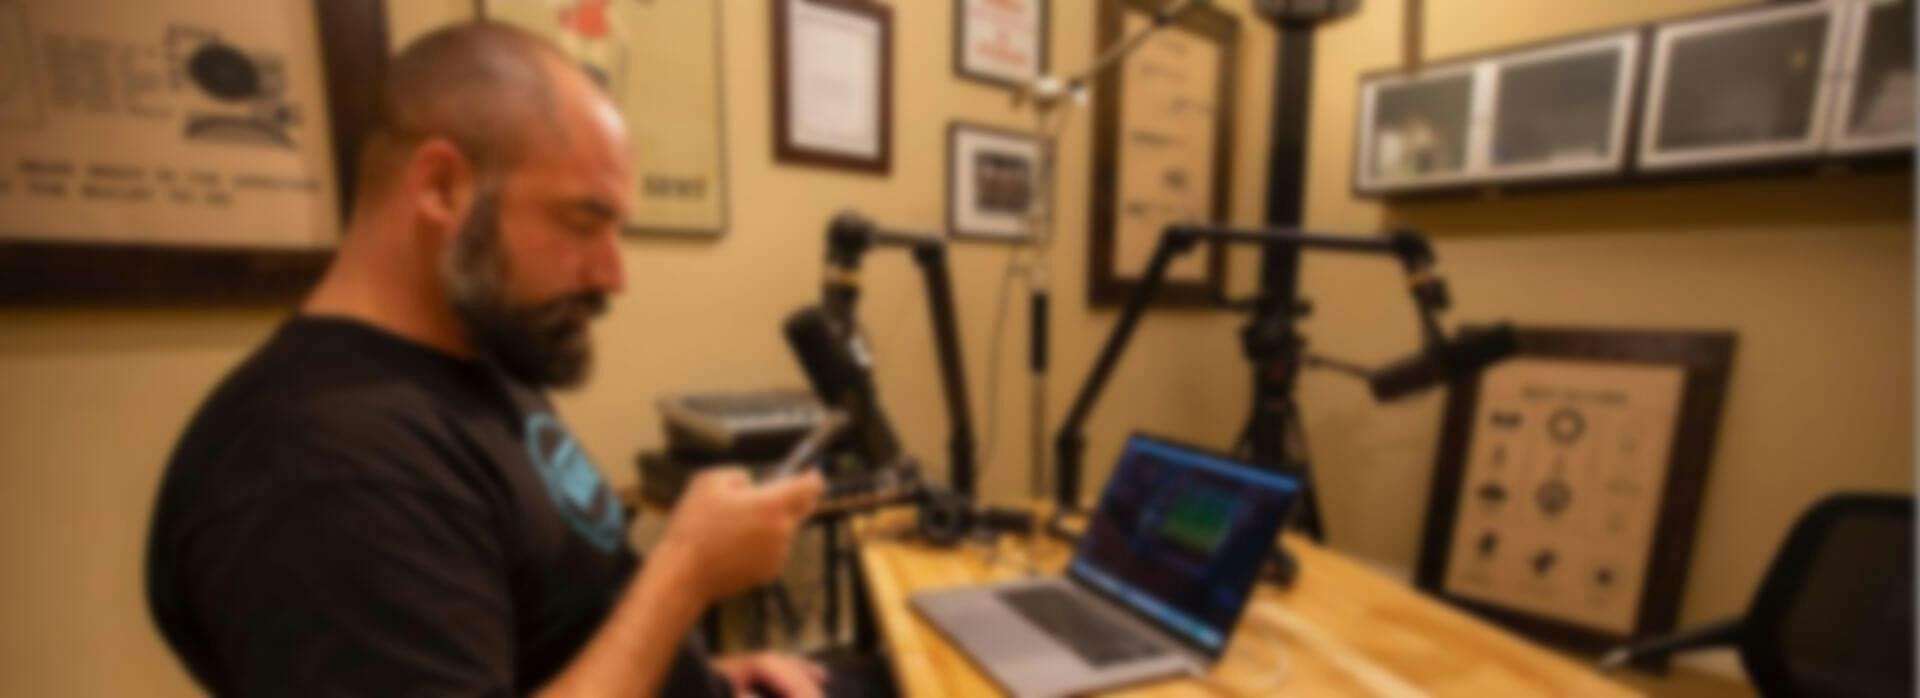 A blurred image of someone recording a podcast